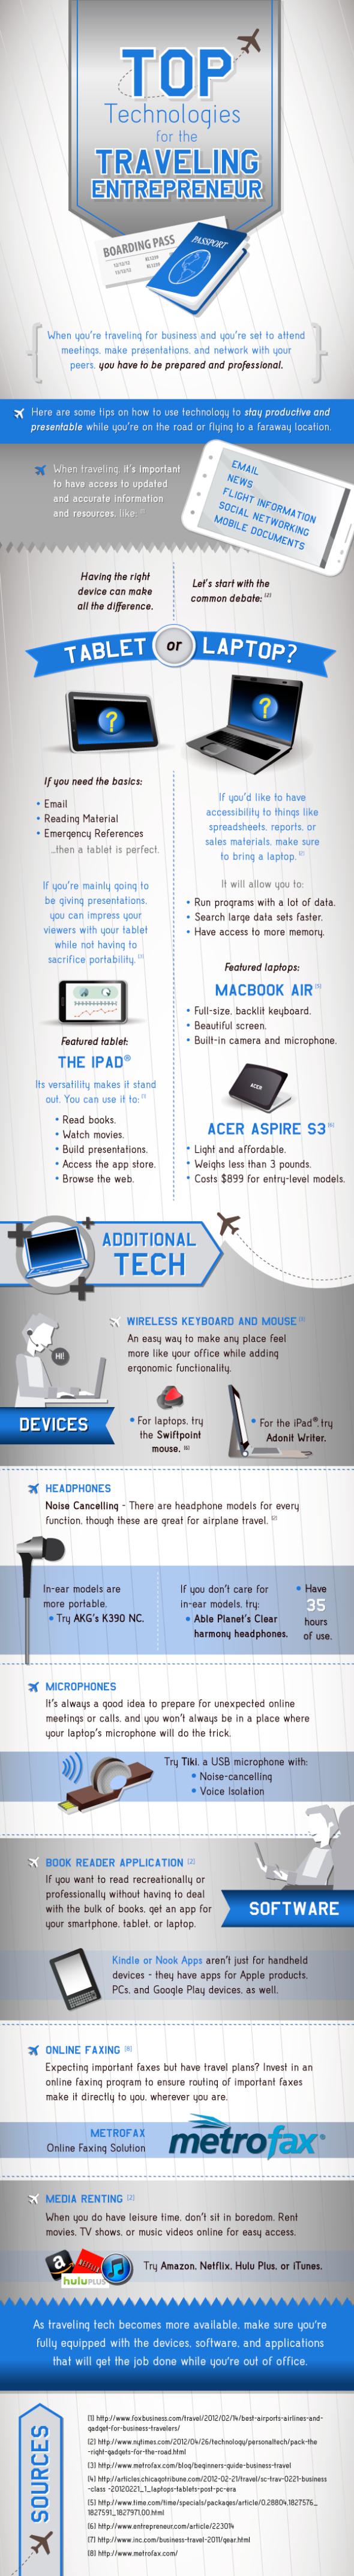 Top Technologies For The Travelling Entrepreneur [Infographic]